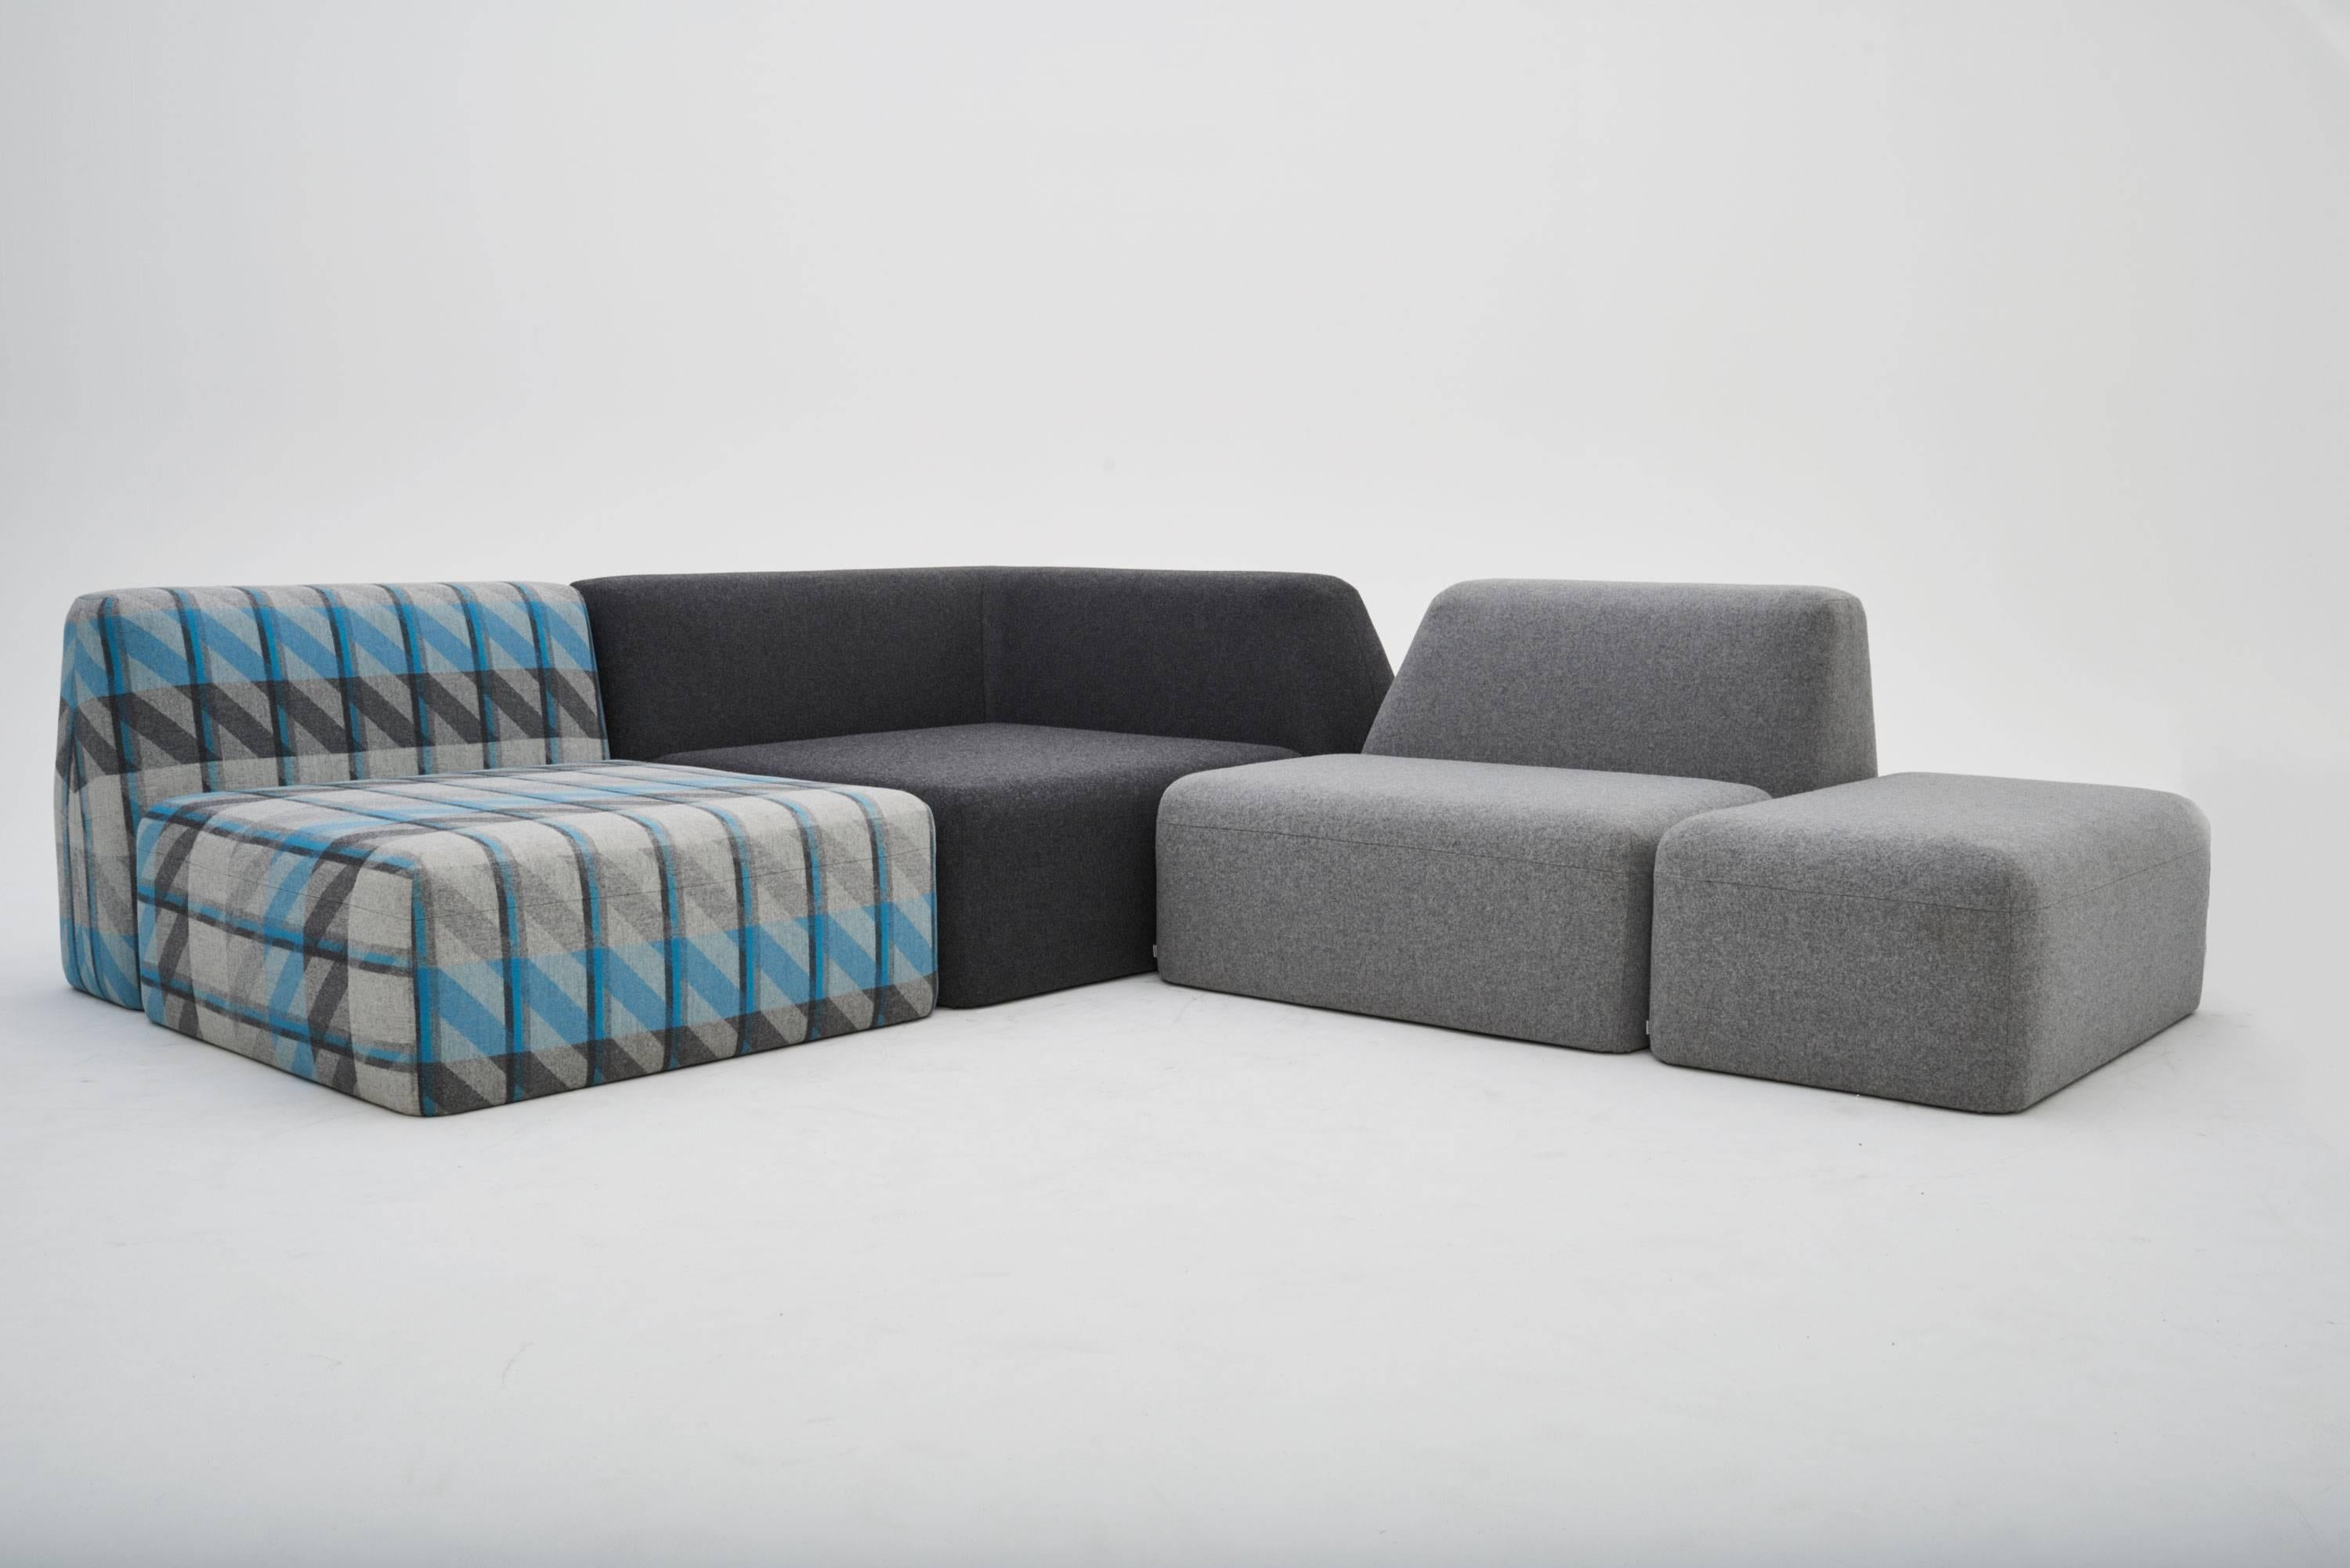 Taking inspiration from the natural forms found in mountain ranges, our Wedge sofa is anything but stationary. The modular design creates endless configurations, adapting to the size or purpose of any room. Filled with contouring hi-resiliency foam